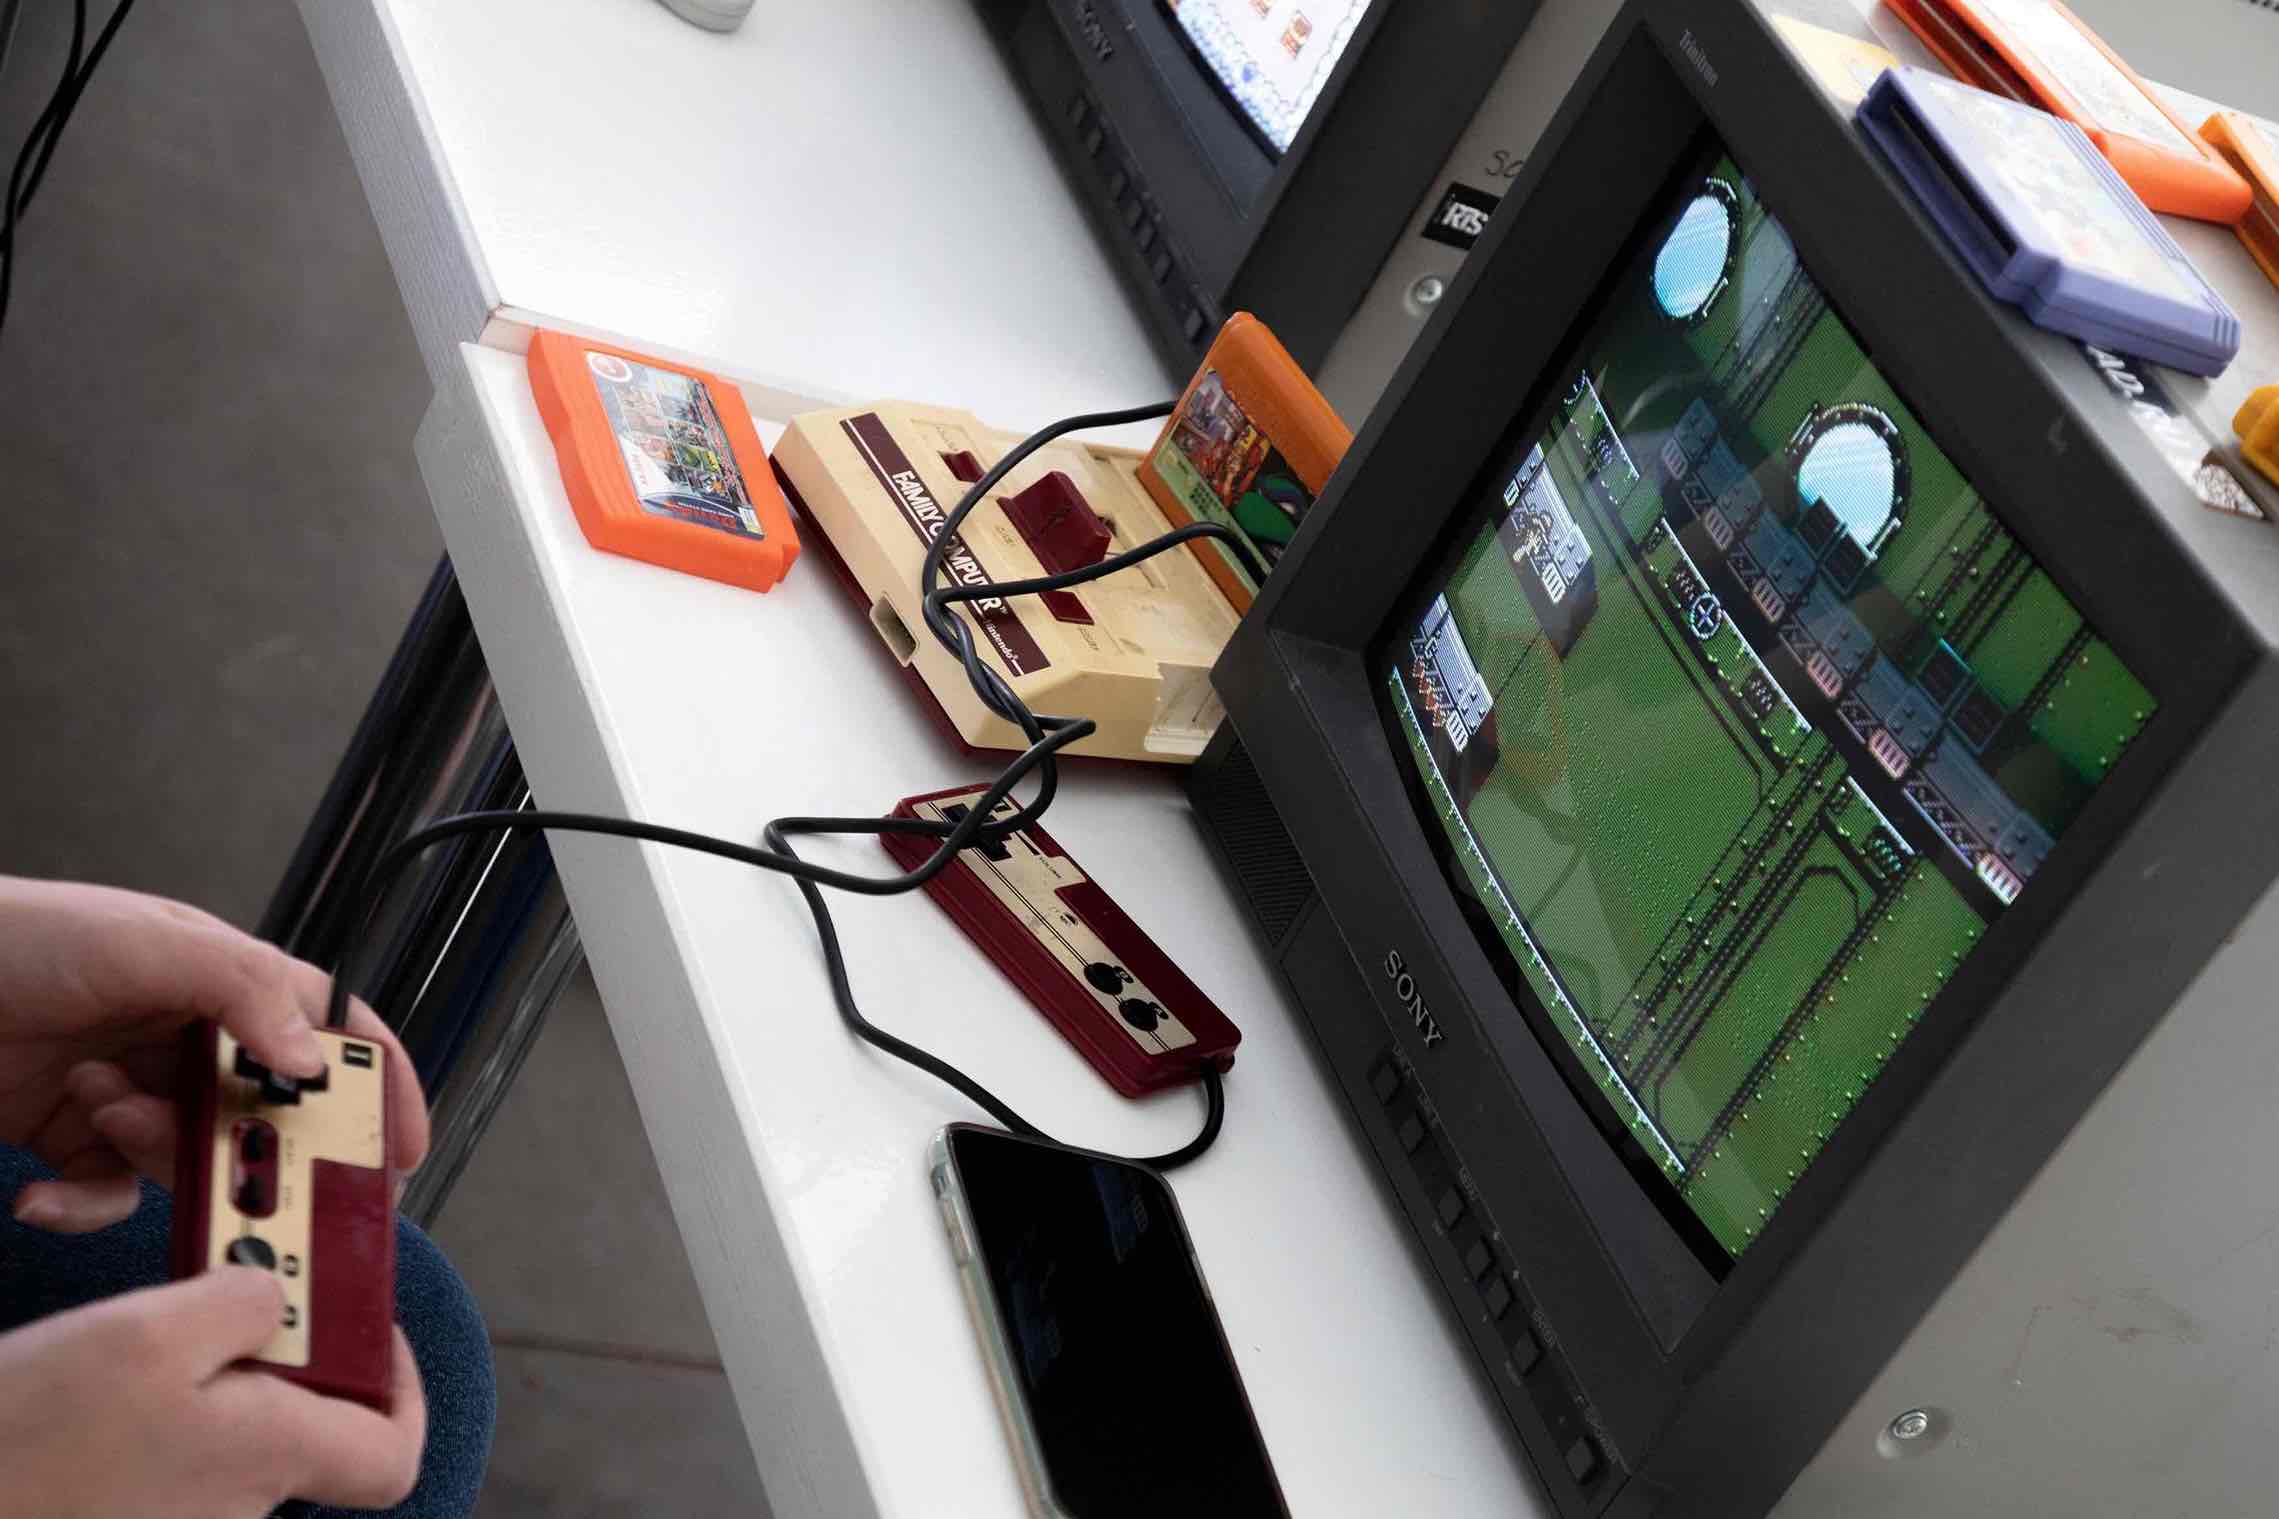 A man plays at a Nintendo Entertainment System console